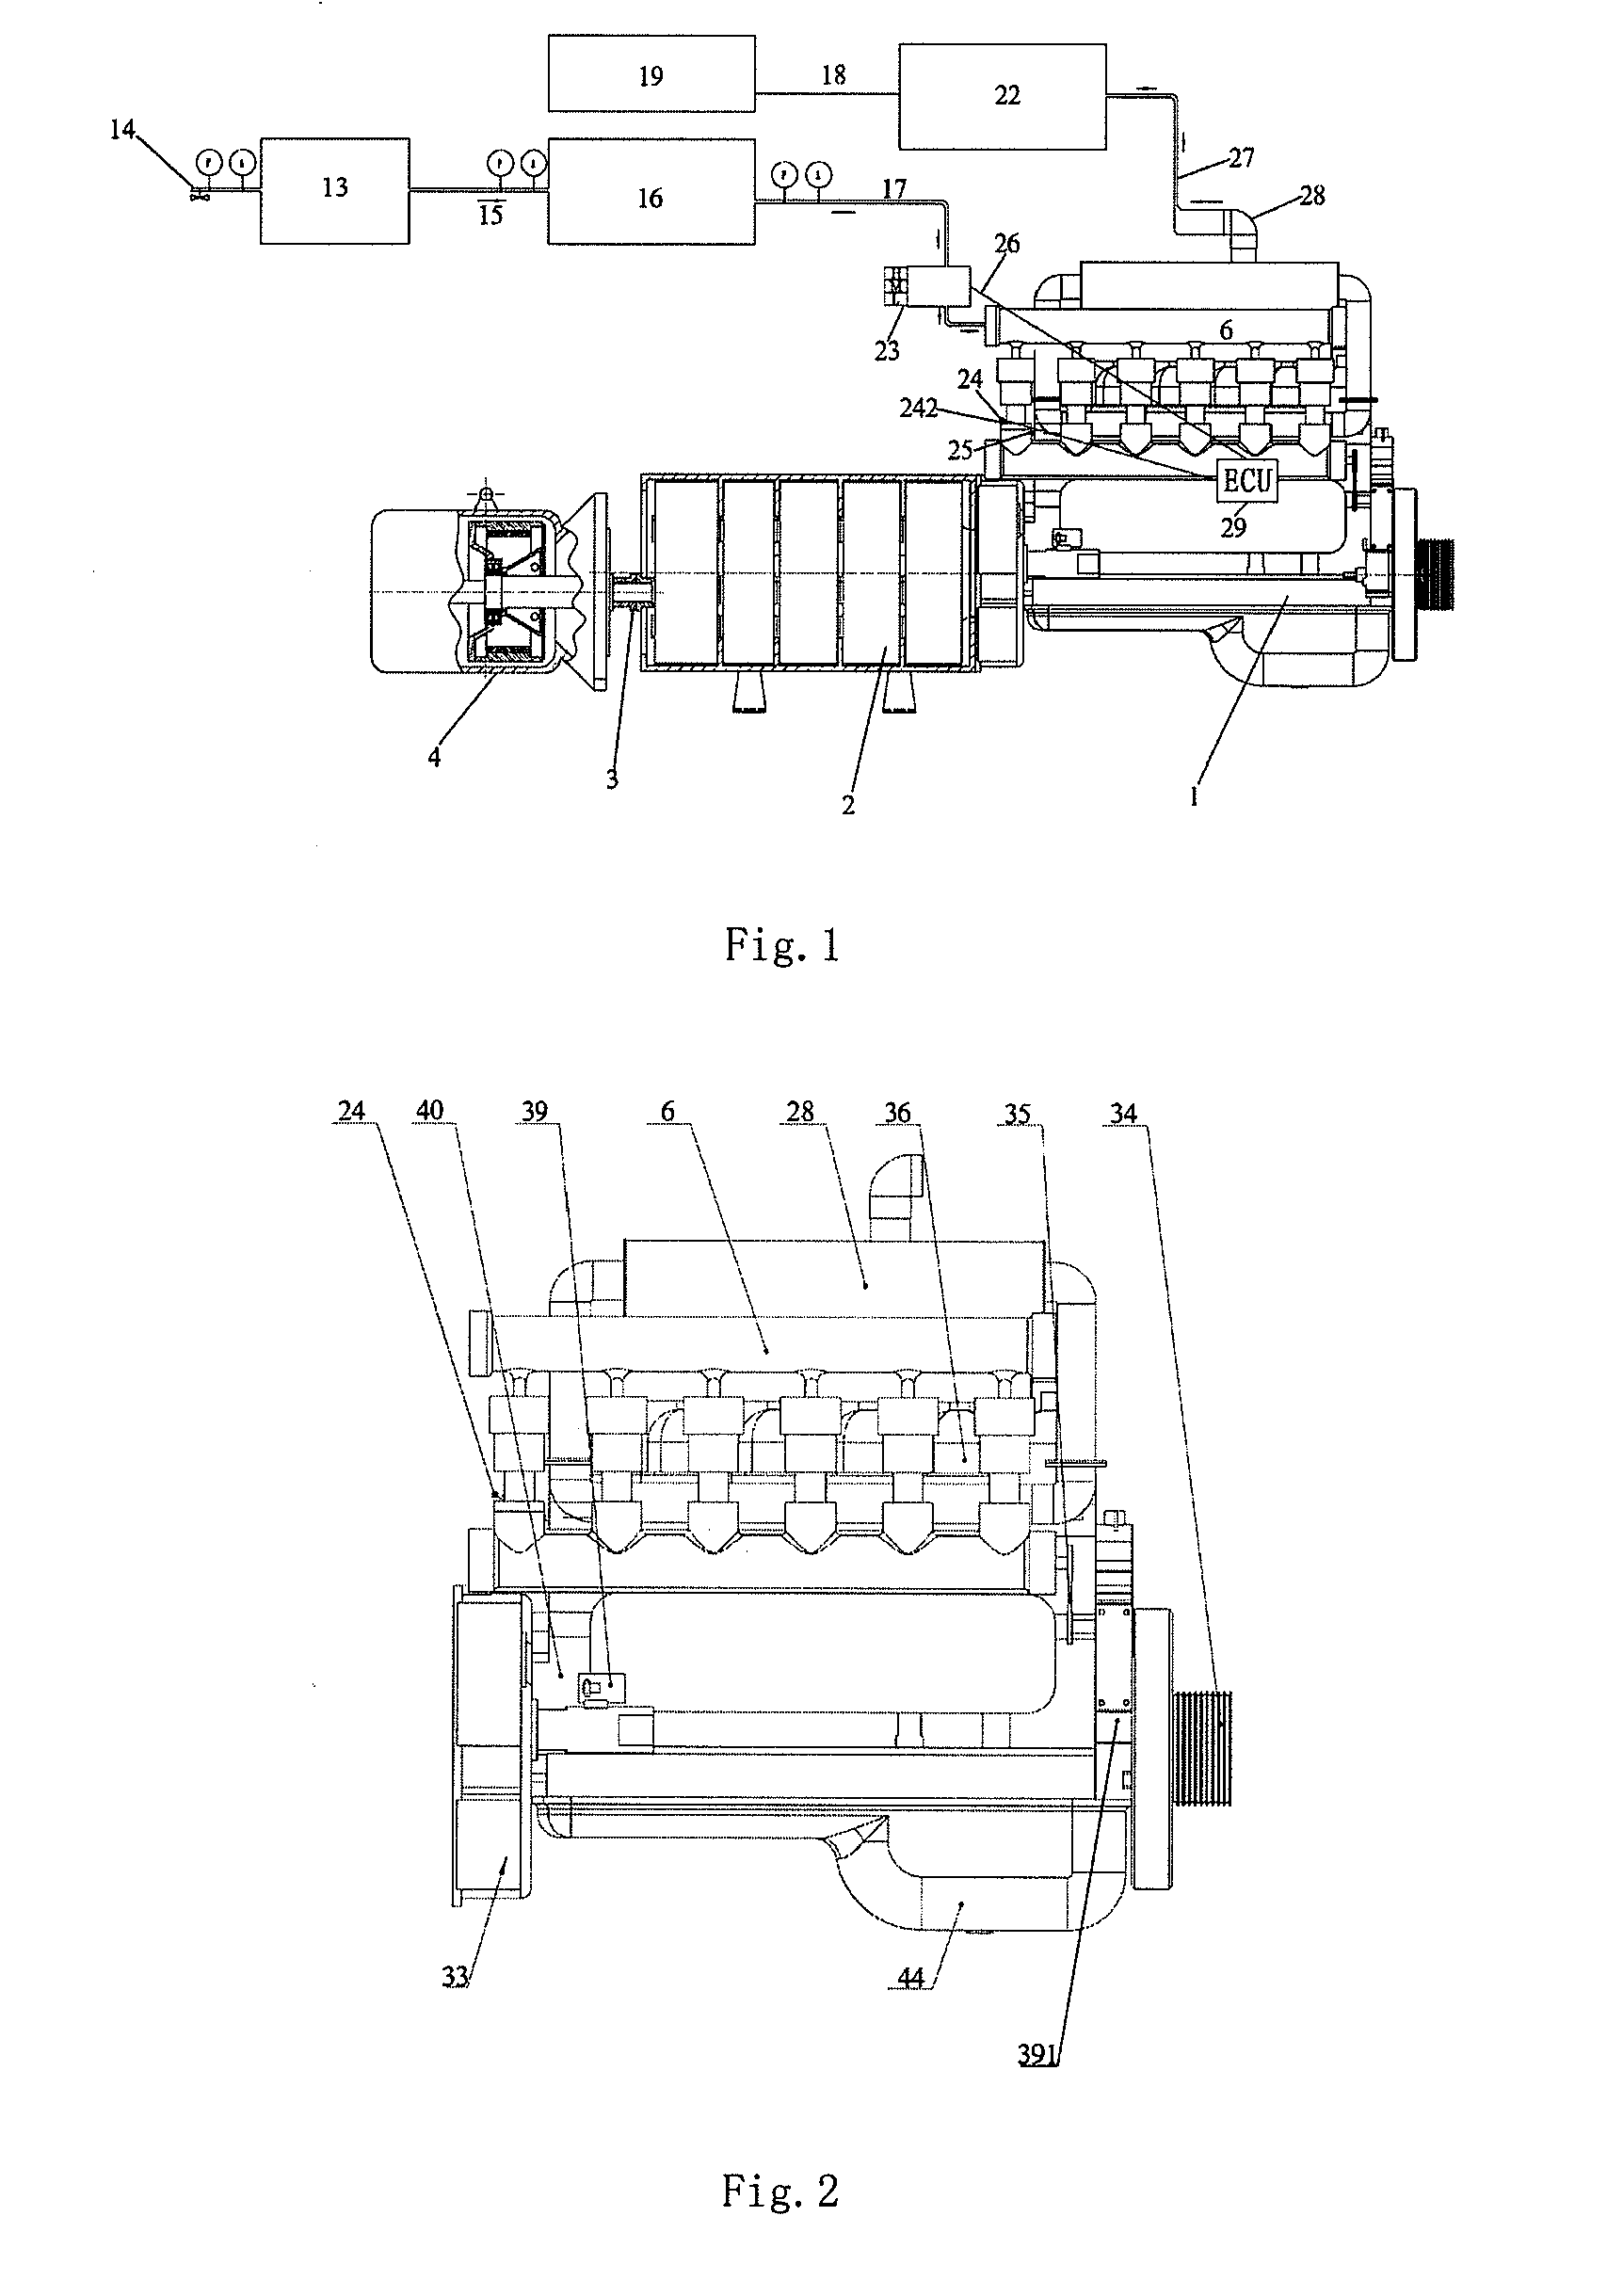 Two-stroke air-powered engine assembly